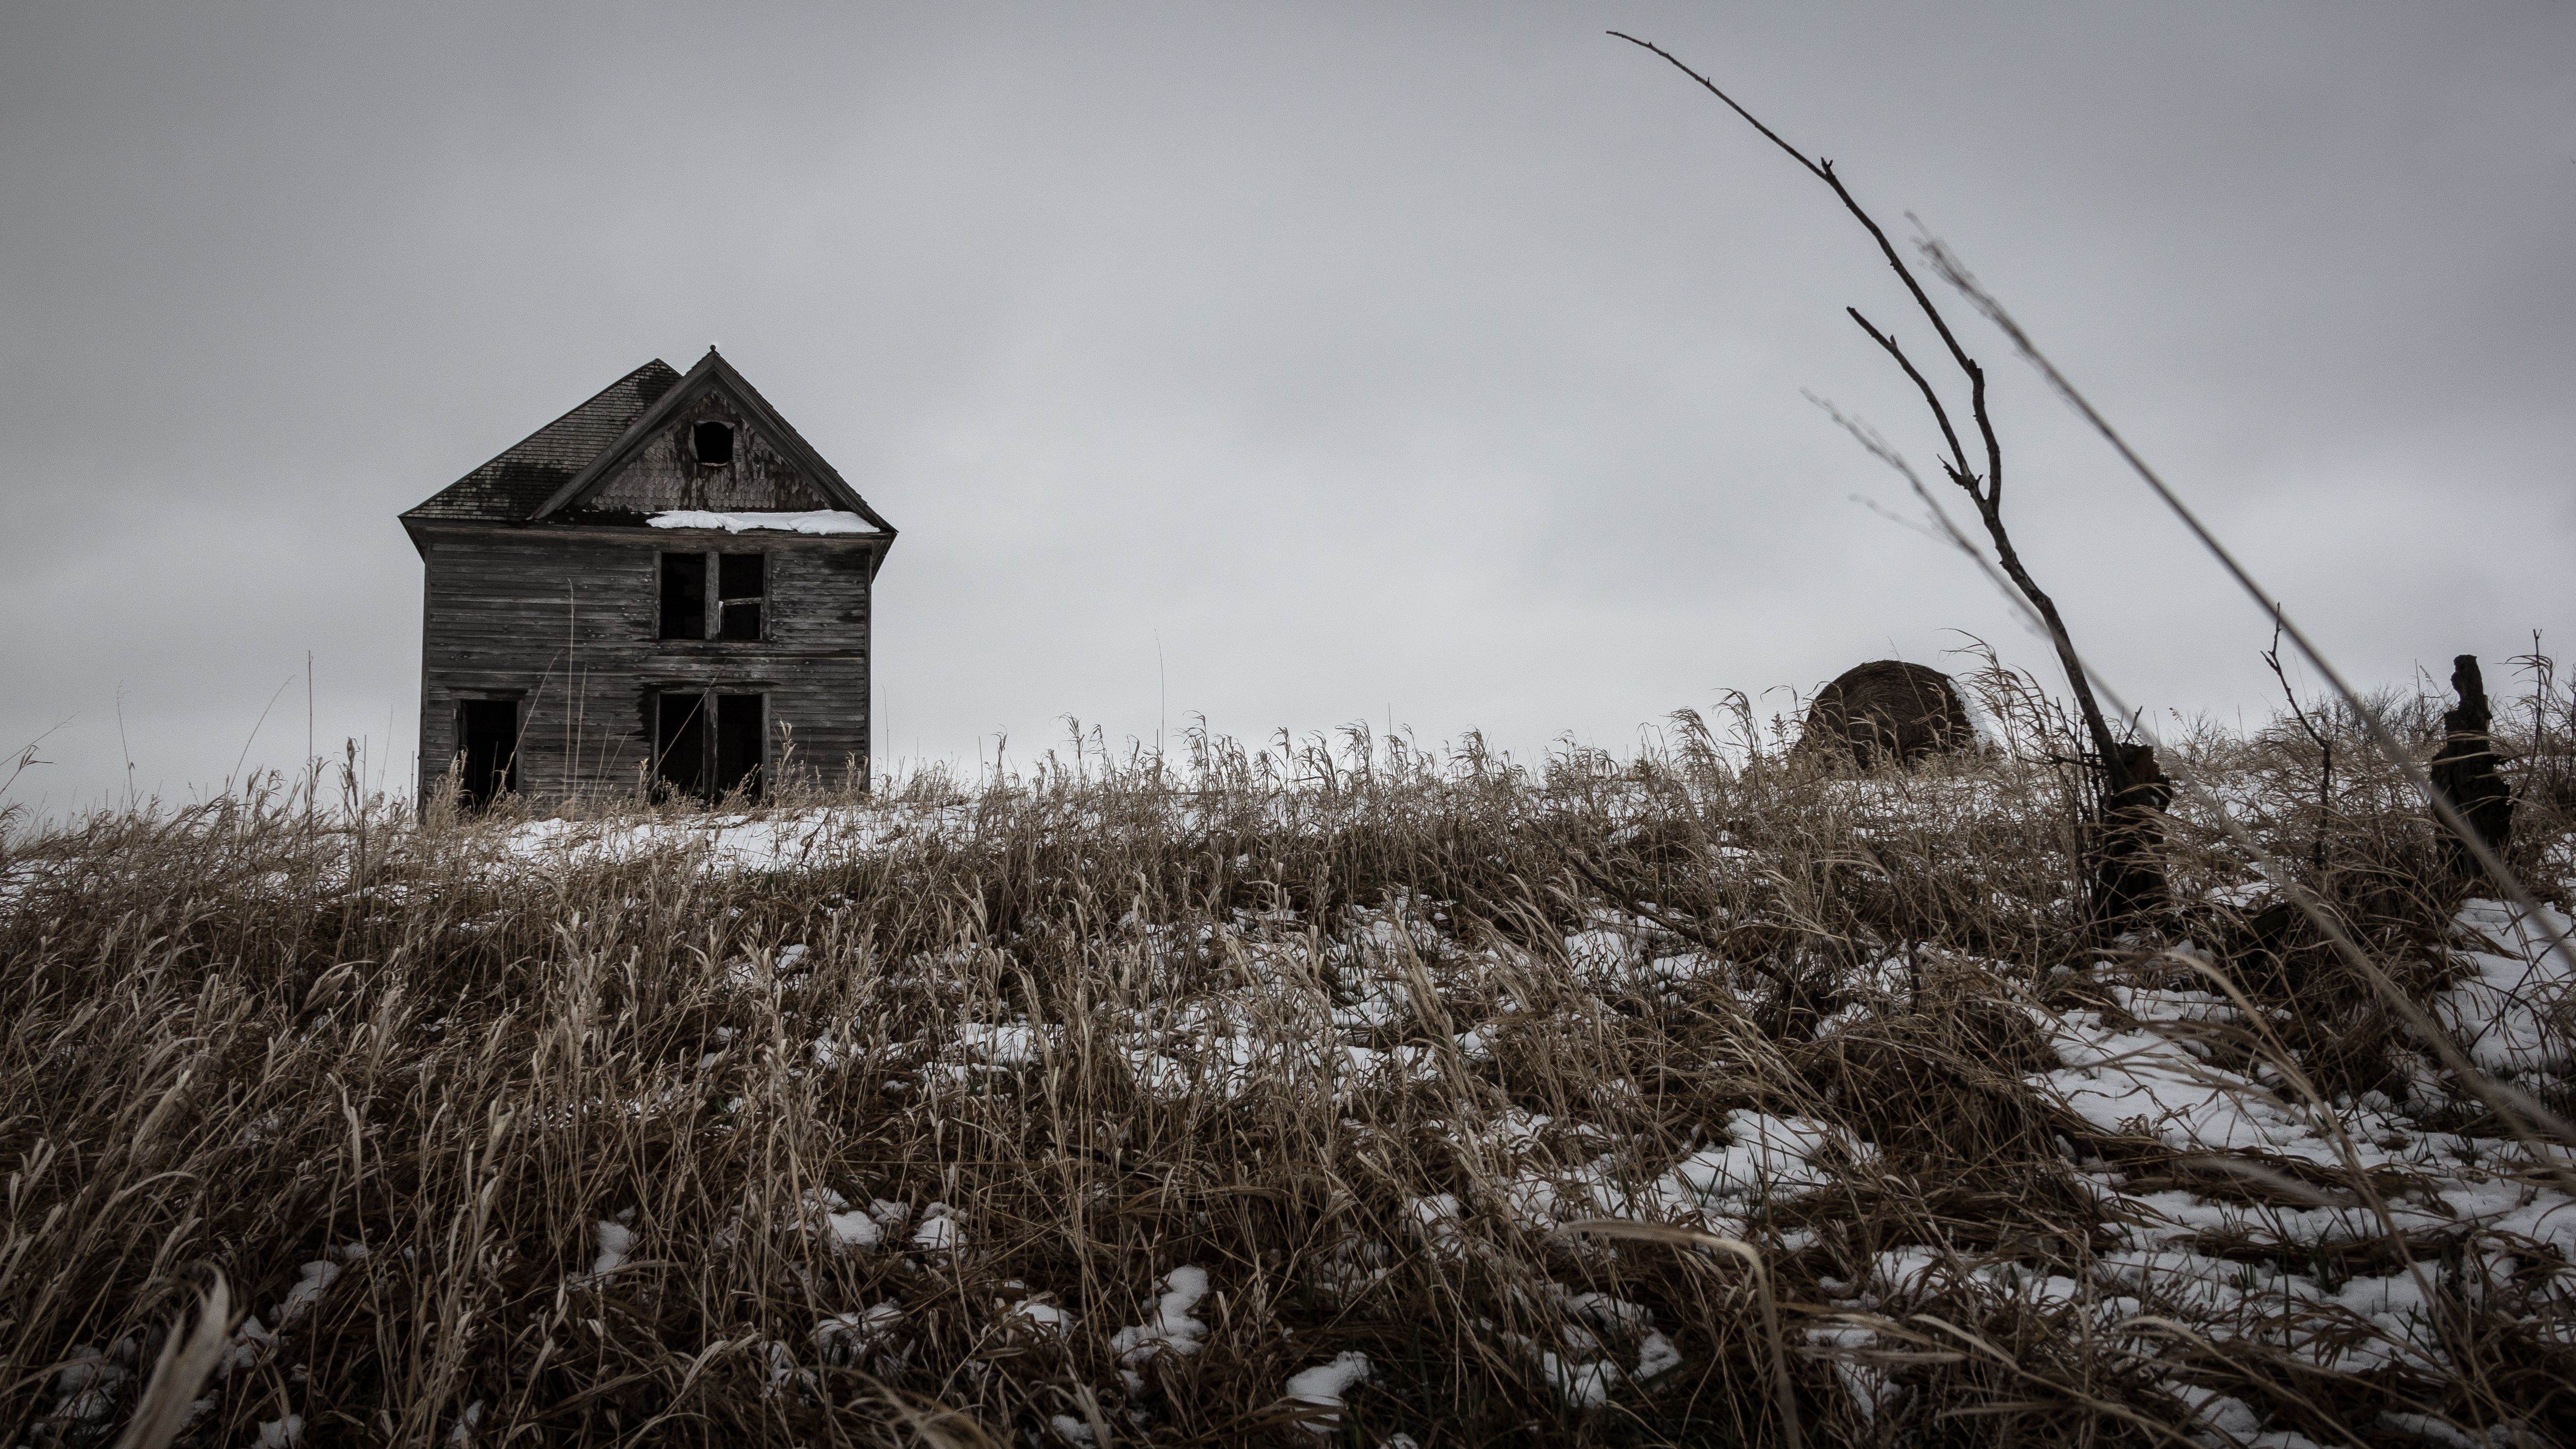 Wallpaper, winter, house, abandoned, rural, town, decay, ghost, North, spooky, isolation, lonely, desolate, dakota 5134x2888